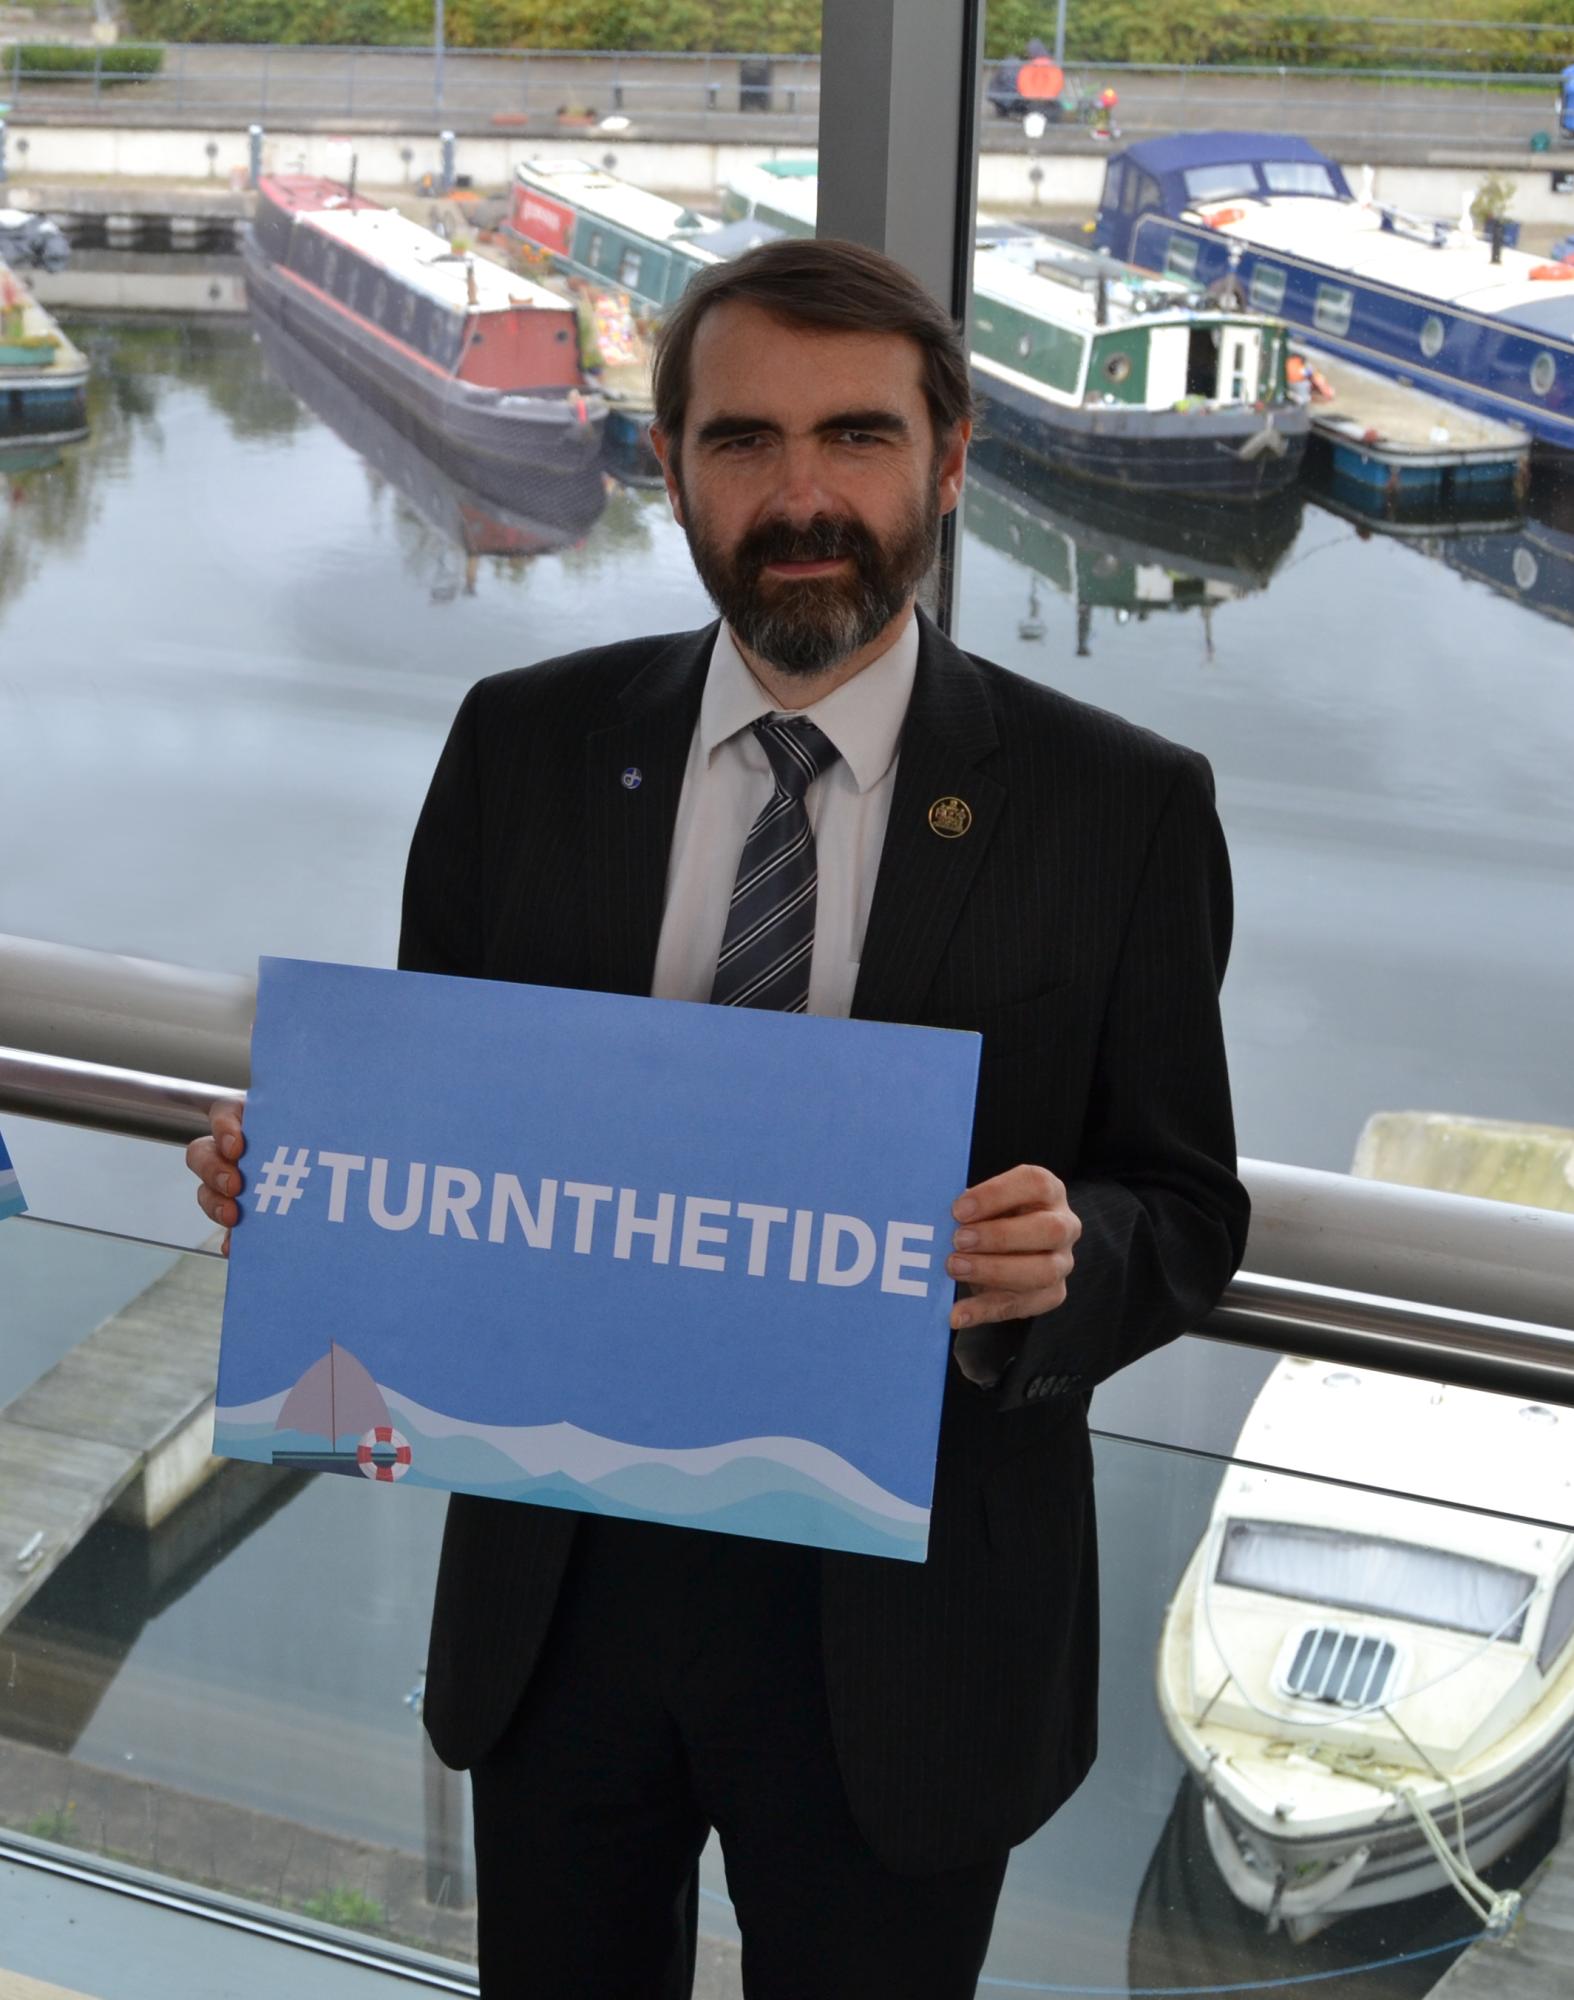 councillor gordan low holding a blue sign that reads #turnthetide